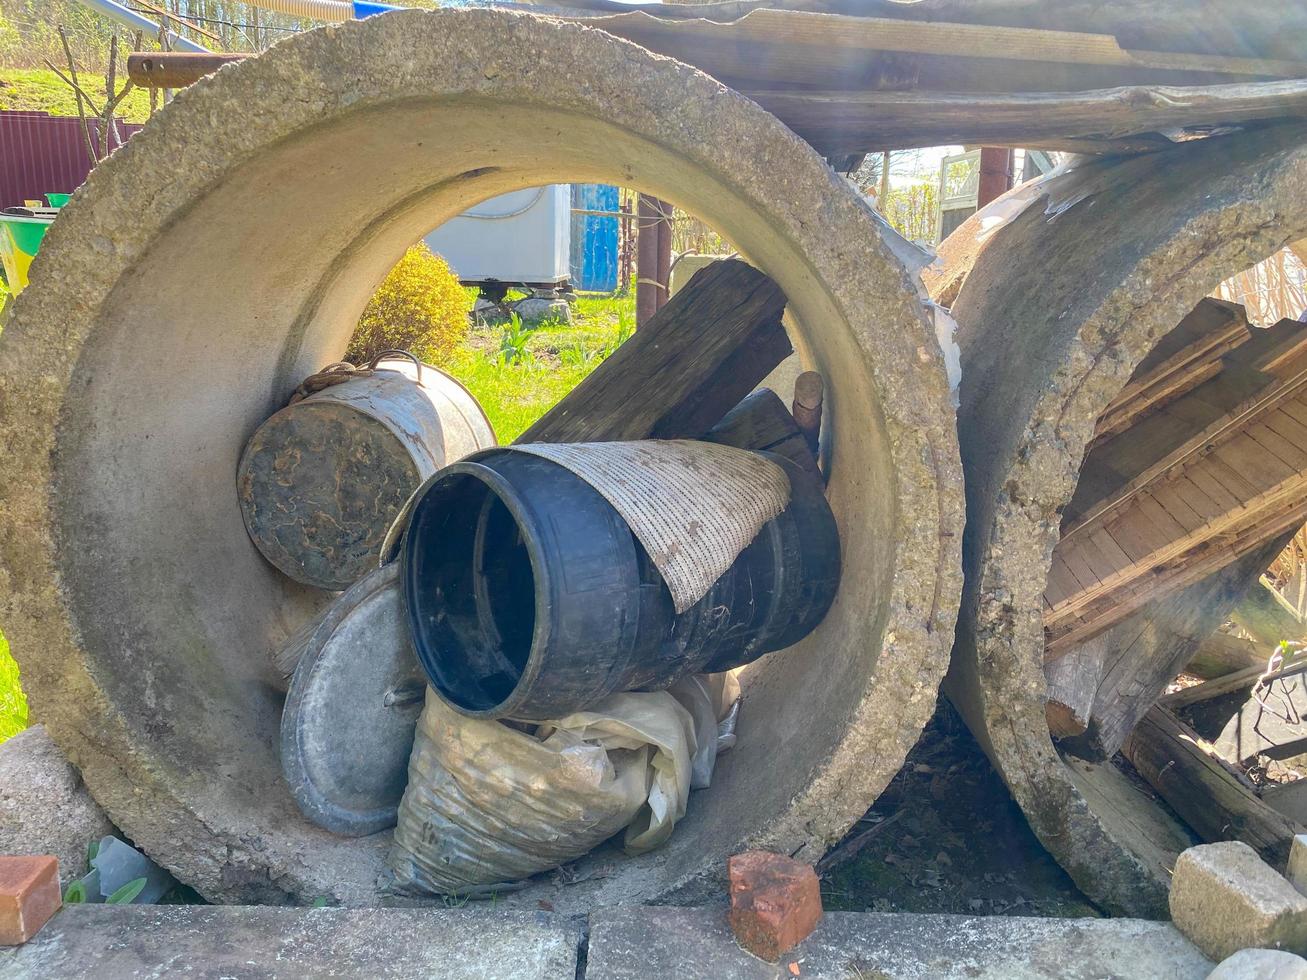 Large concrete cement construction rings for a well or sewer with industrial debris inside photo